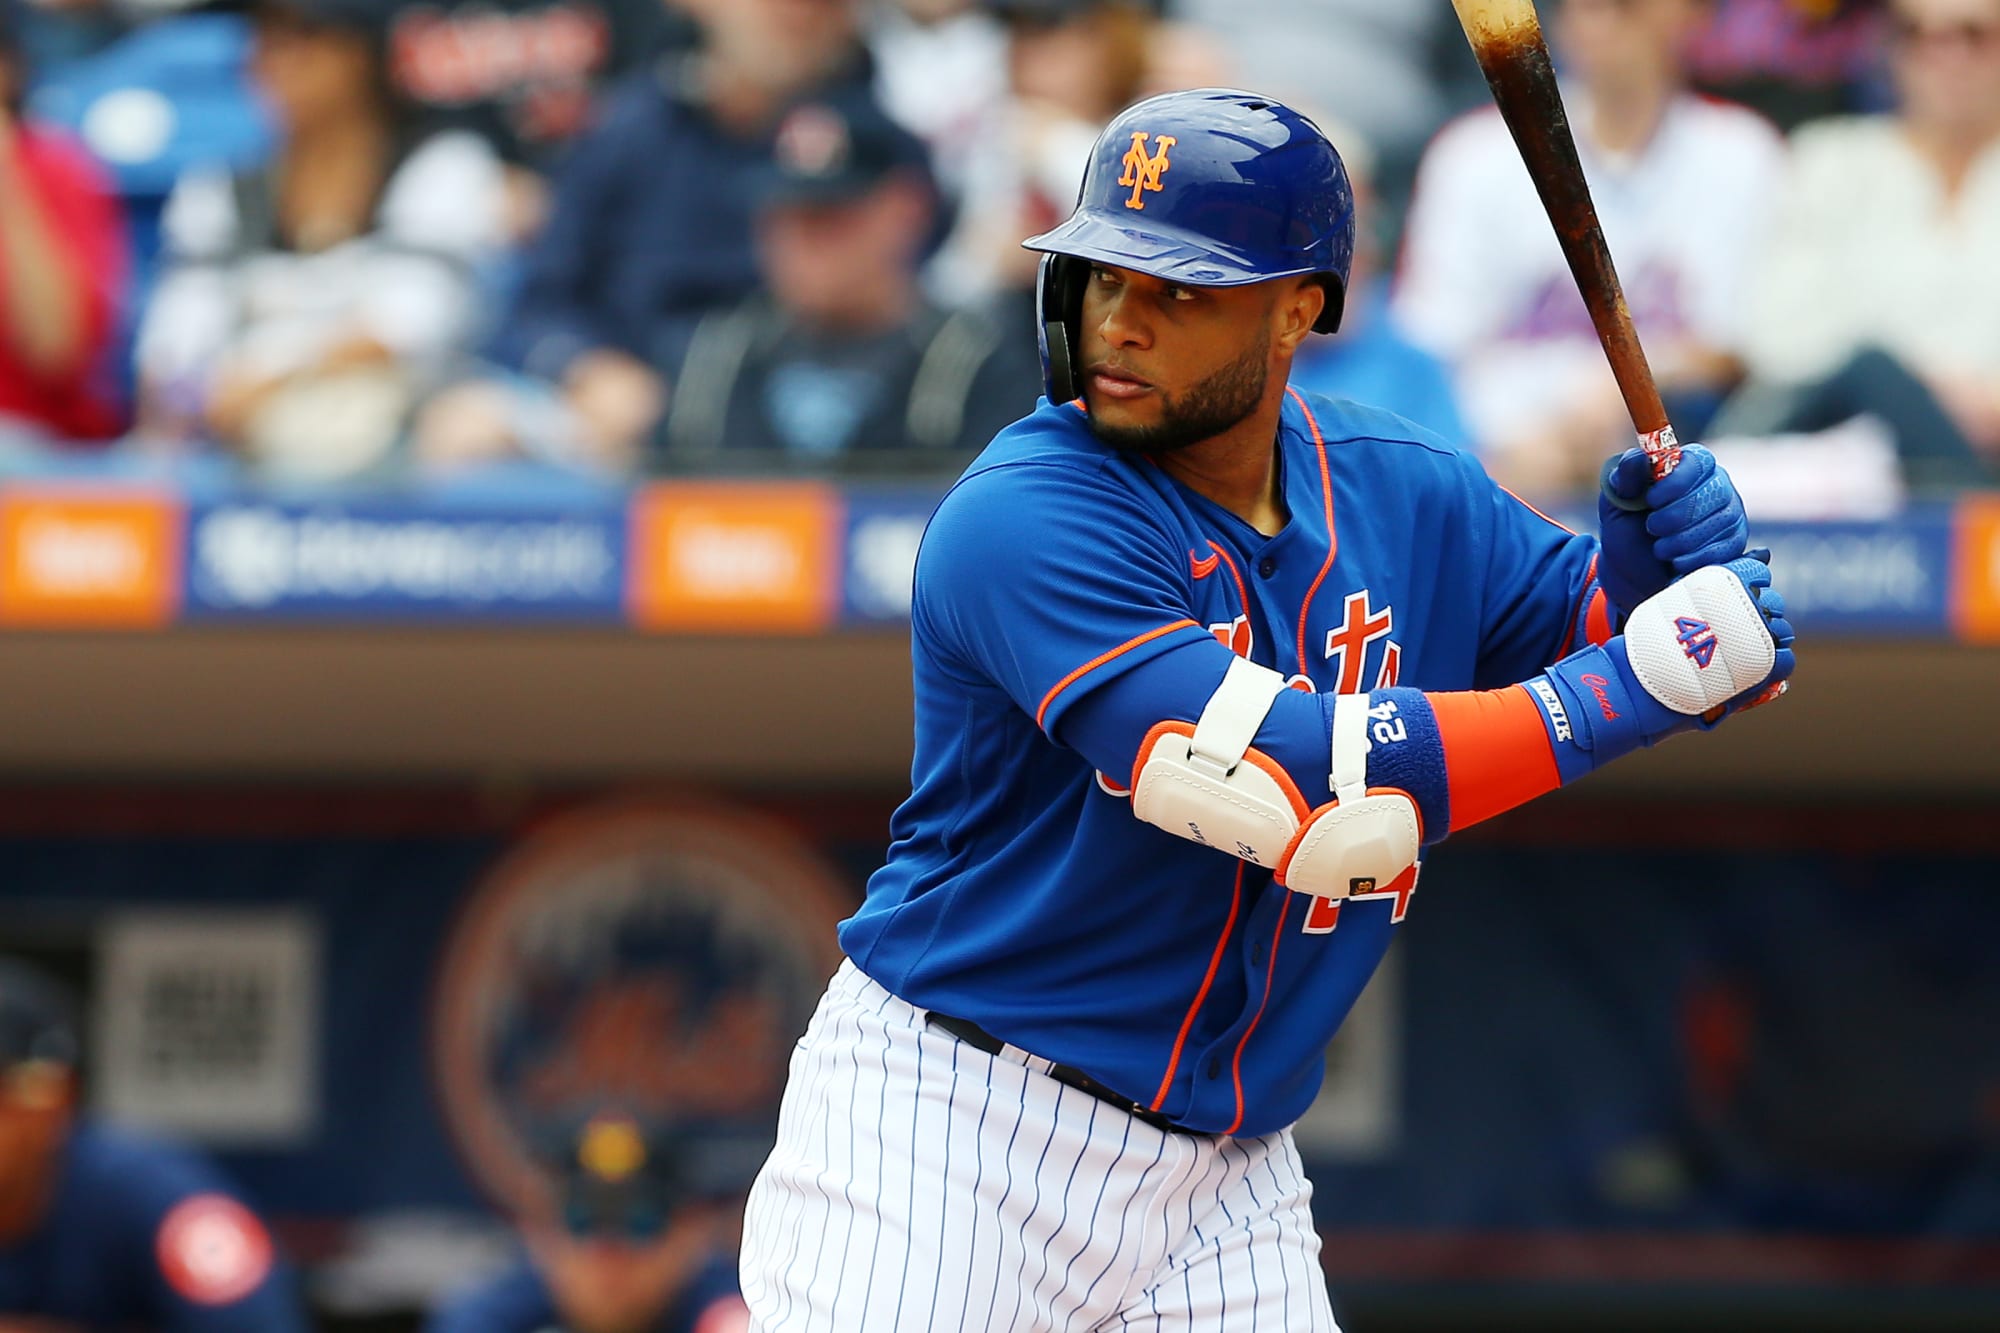 Mets: Why Robinson Cano is a good option for the DH spot in 2021